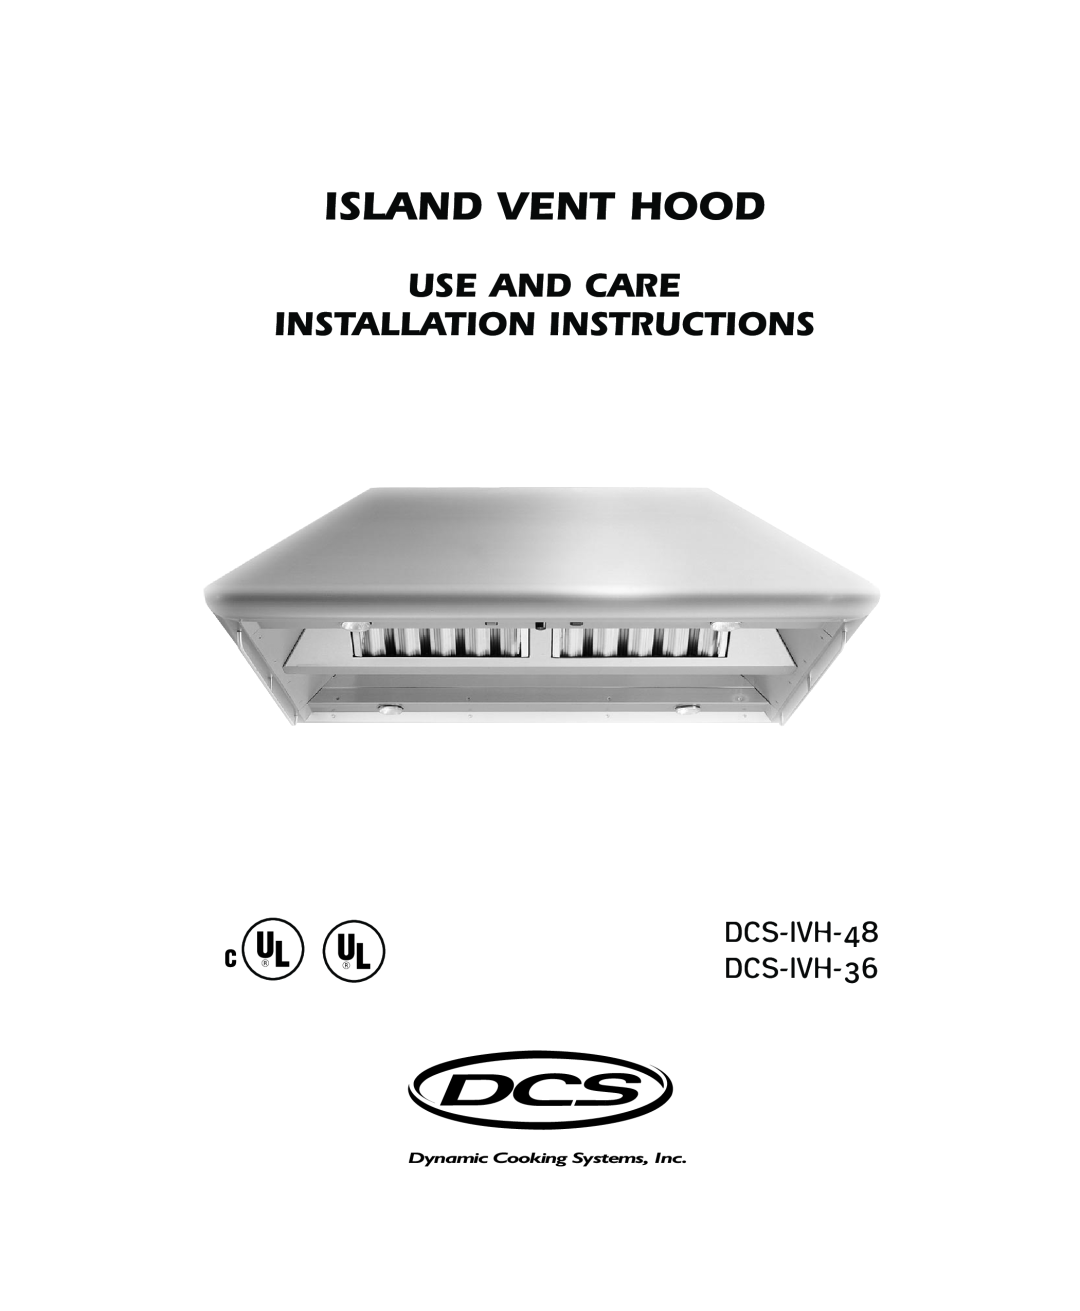 DCS IVH-48 installation instructions Use And Care Installation Instructions, Island Vent Hood 